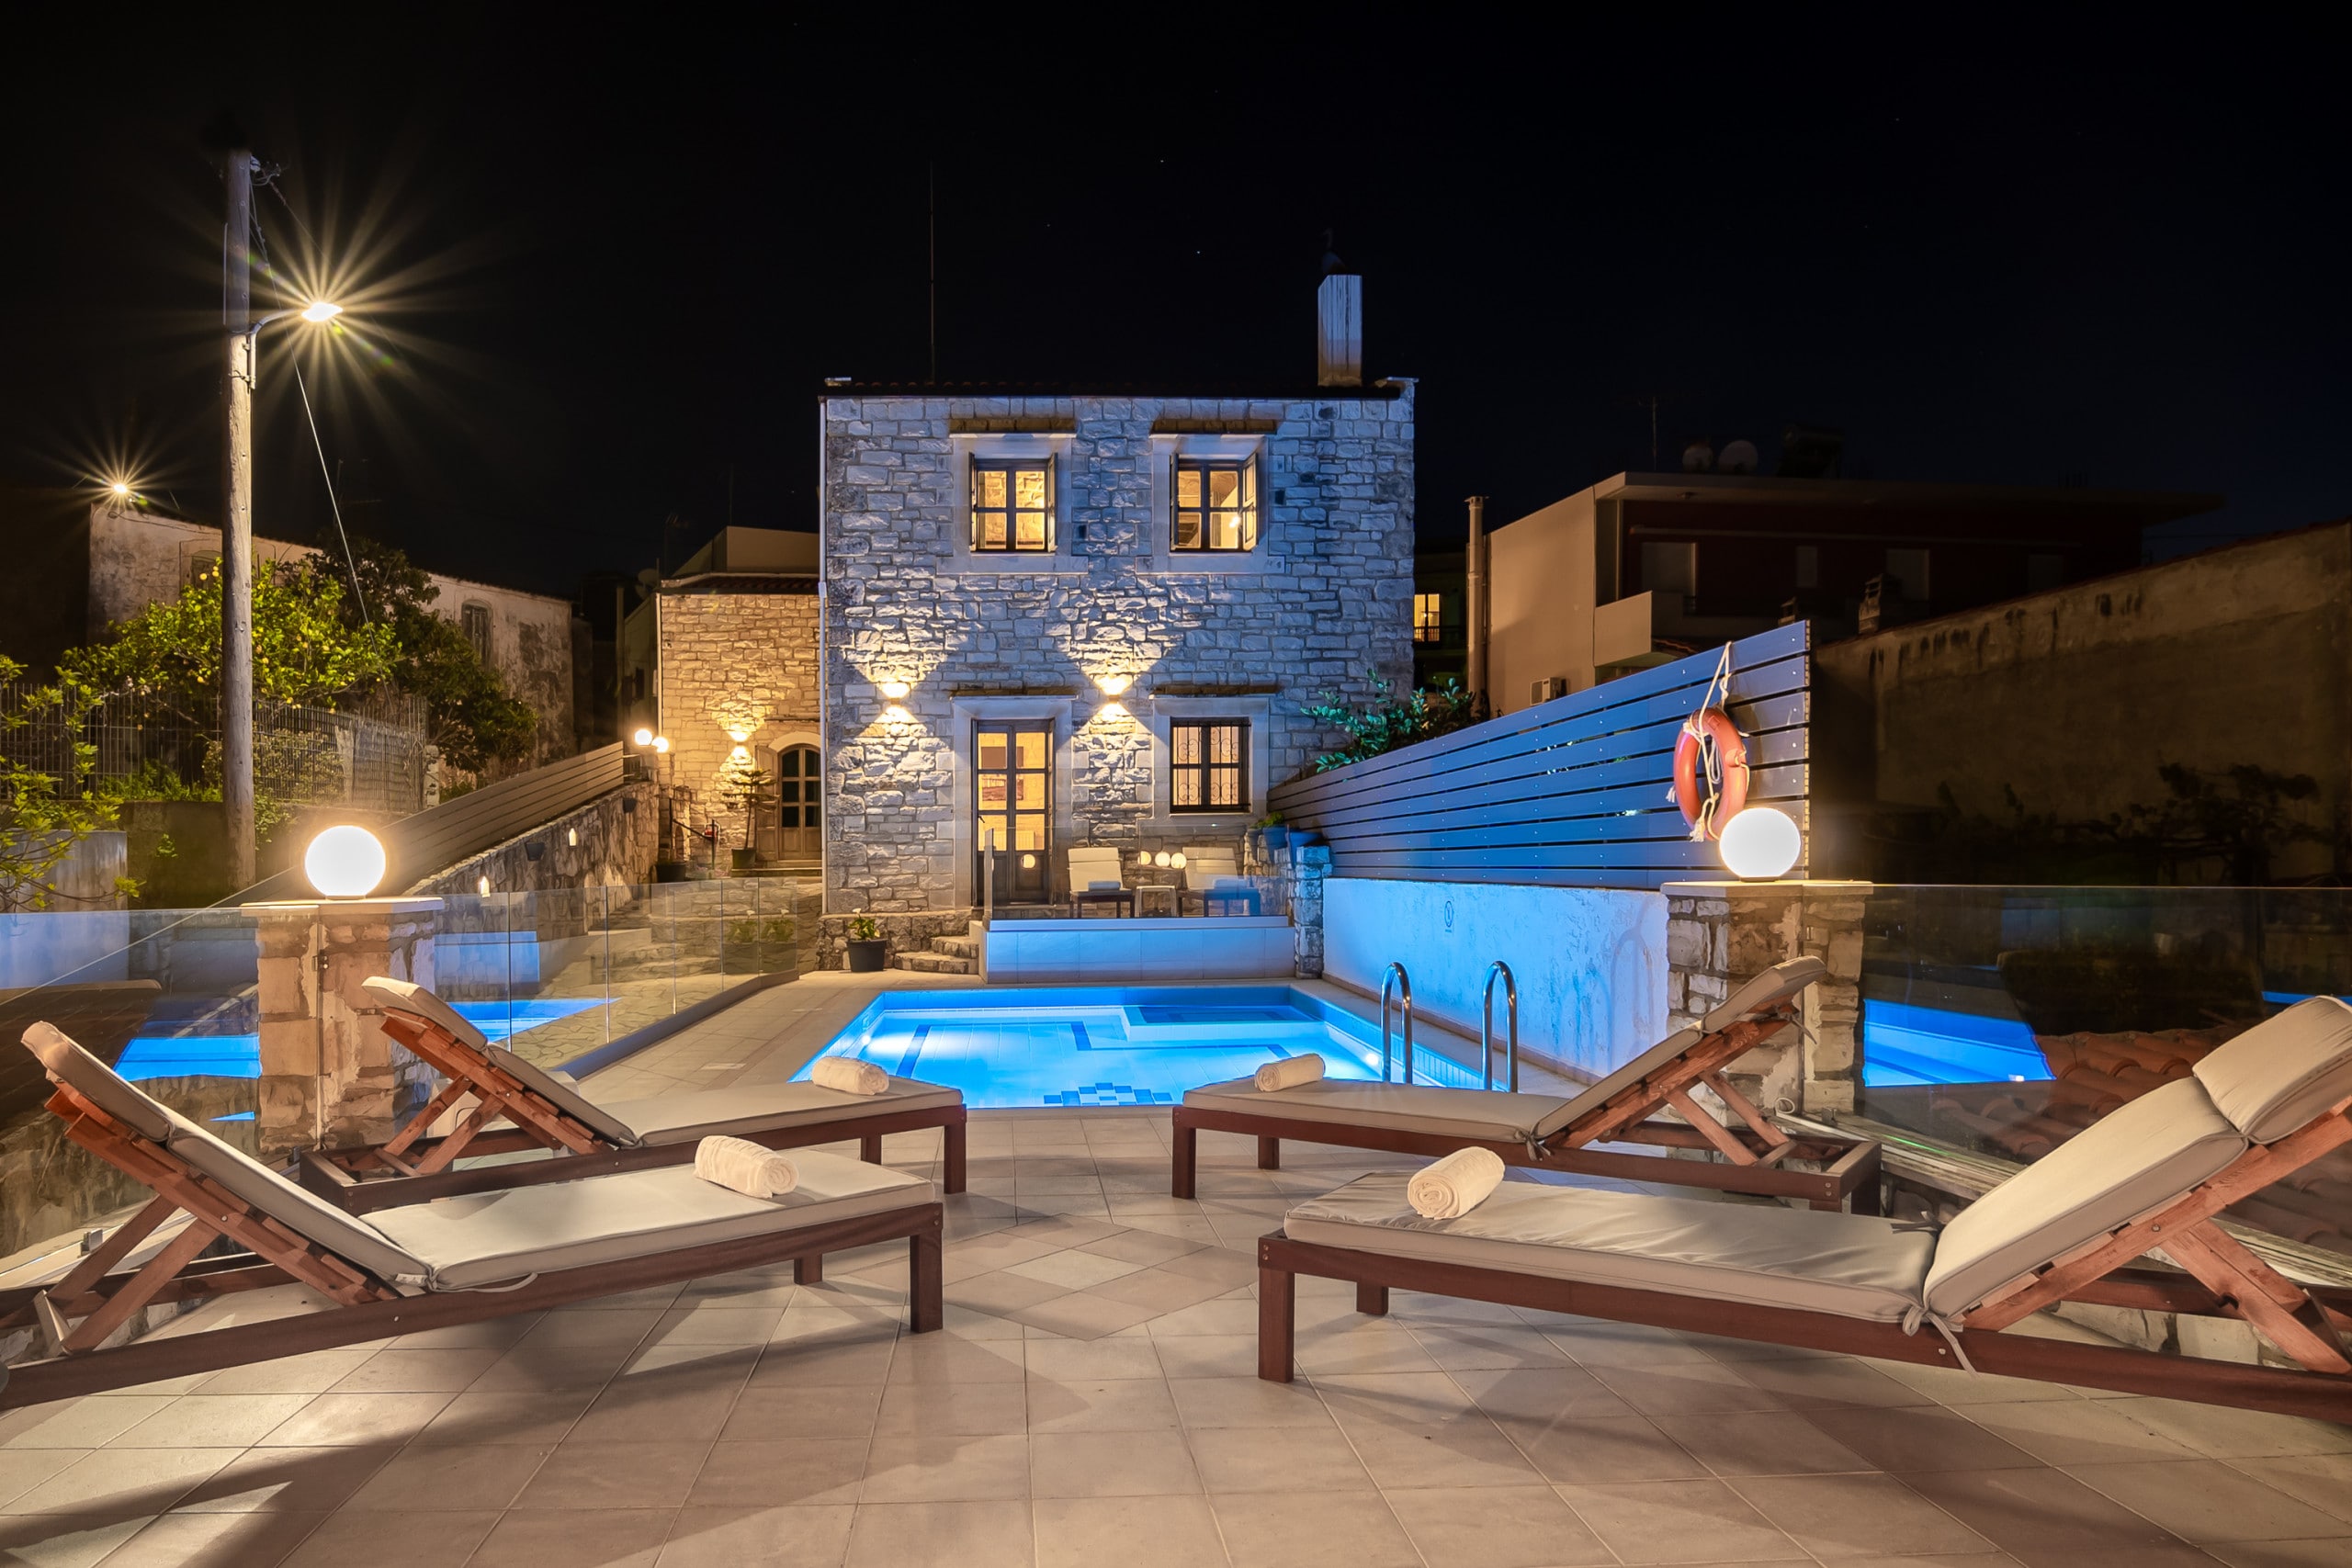 Night View of Renovated Villa, 12 persons, Kids pool, Picturesque village, Rethymno